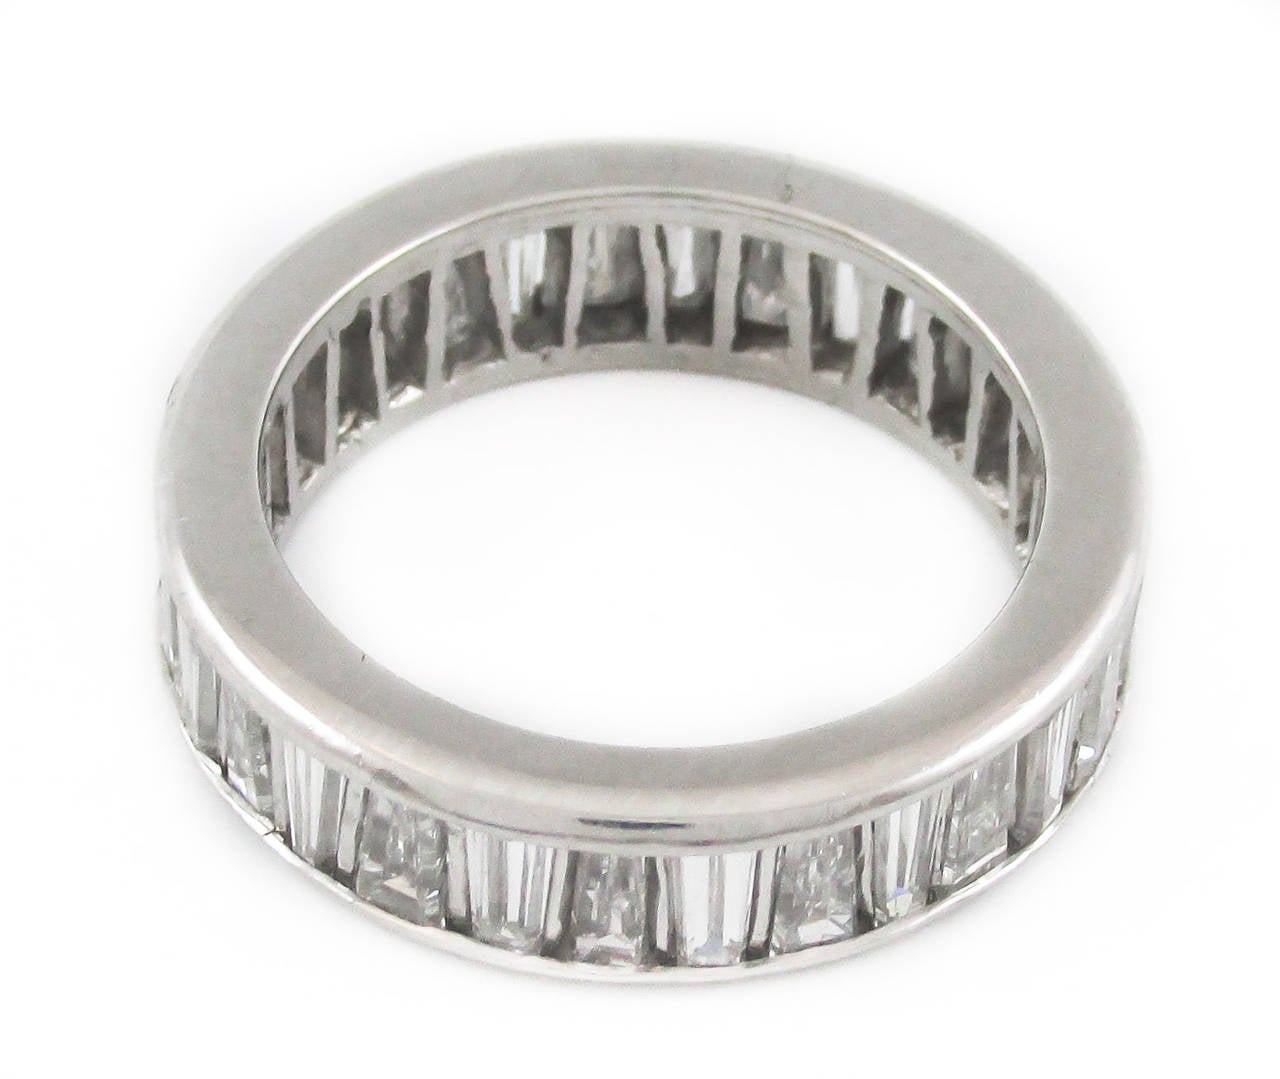 This unusual eternity band is set with 30 revered tapered baguettes diamonds giving the band an interesting play of light. The baguettes are channel set with a thin platinum bar separating each diamond. The average color of the diamonds are G-H and